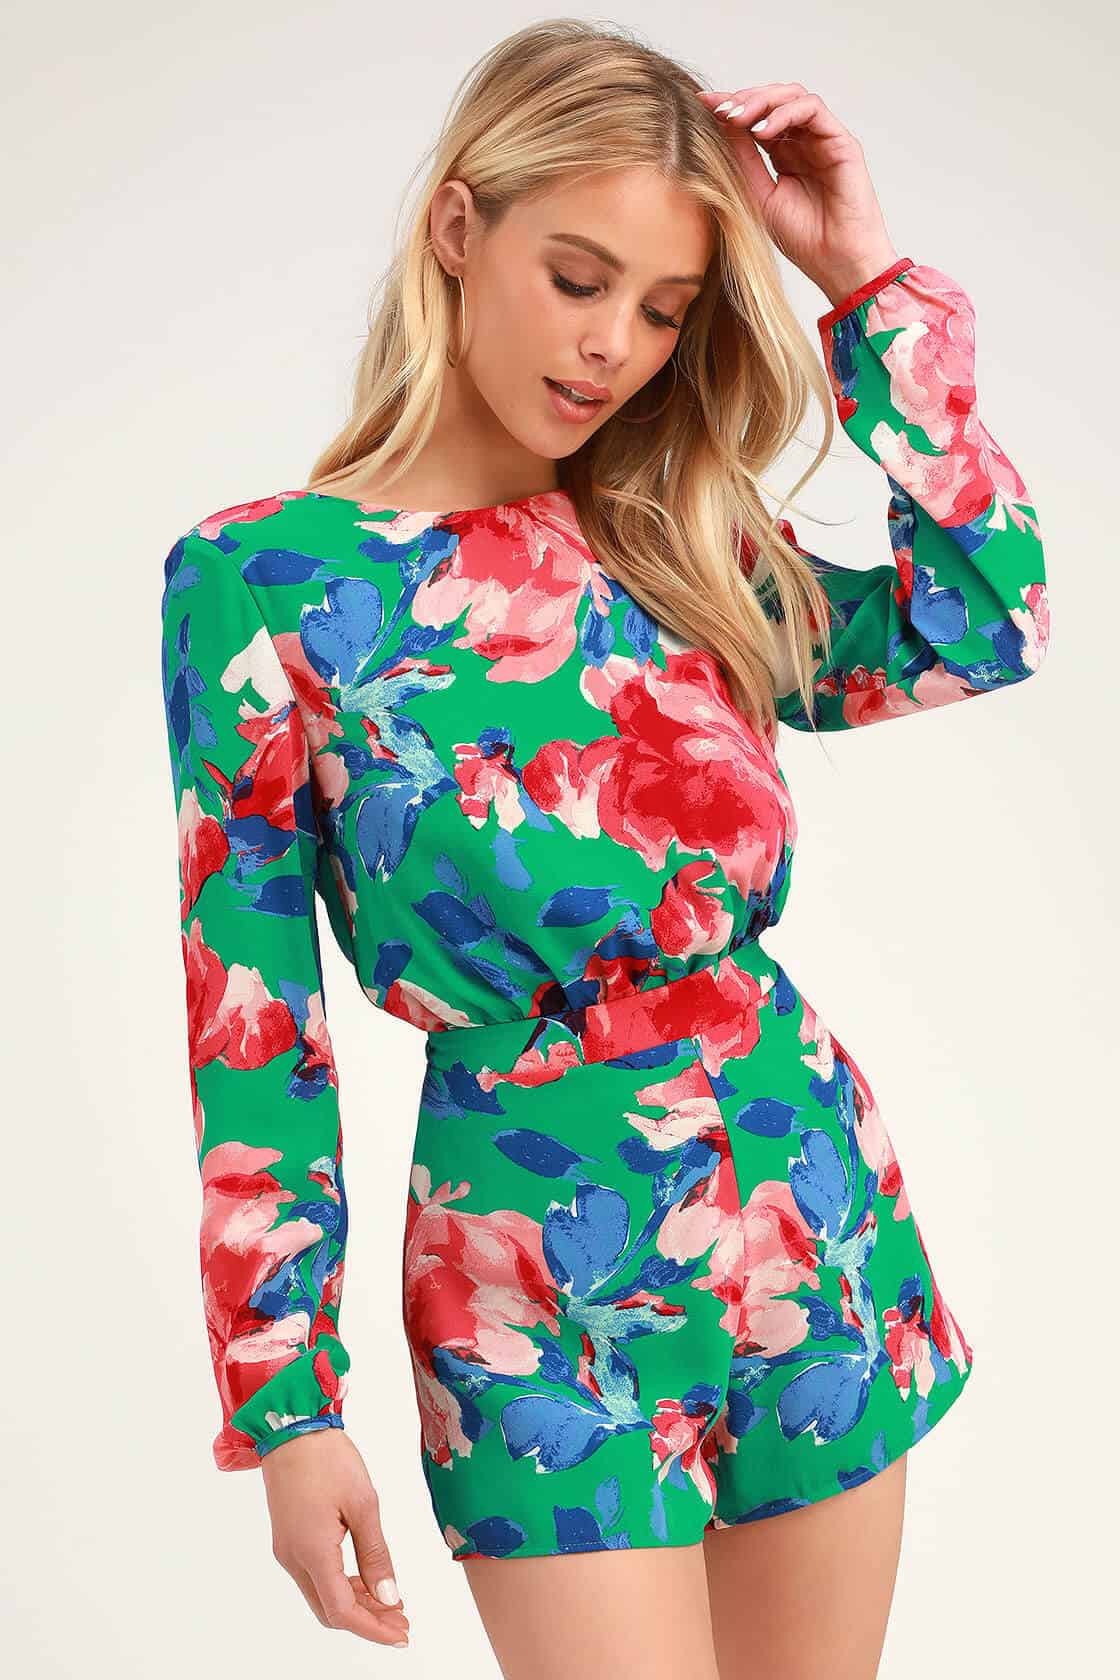 Wedding Guest Outfits Green Floral Print Playsuit Backless Long Sleeve Romper (1)